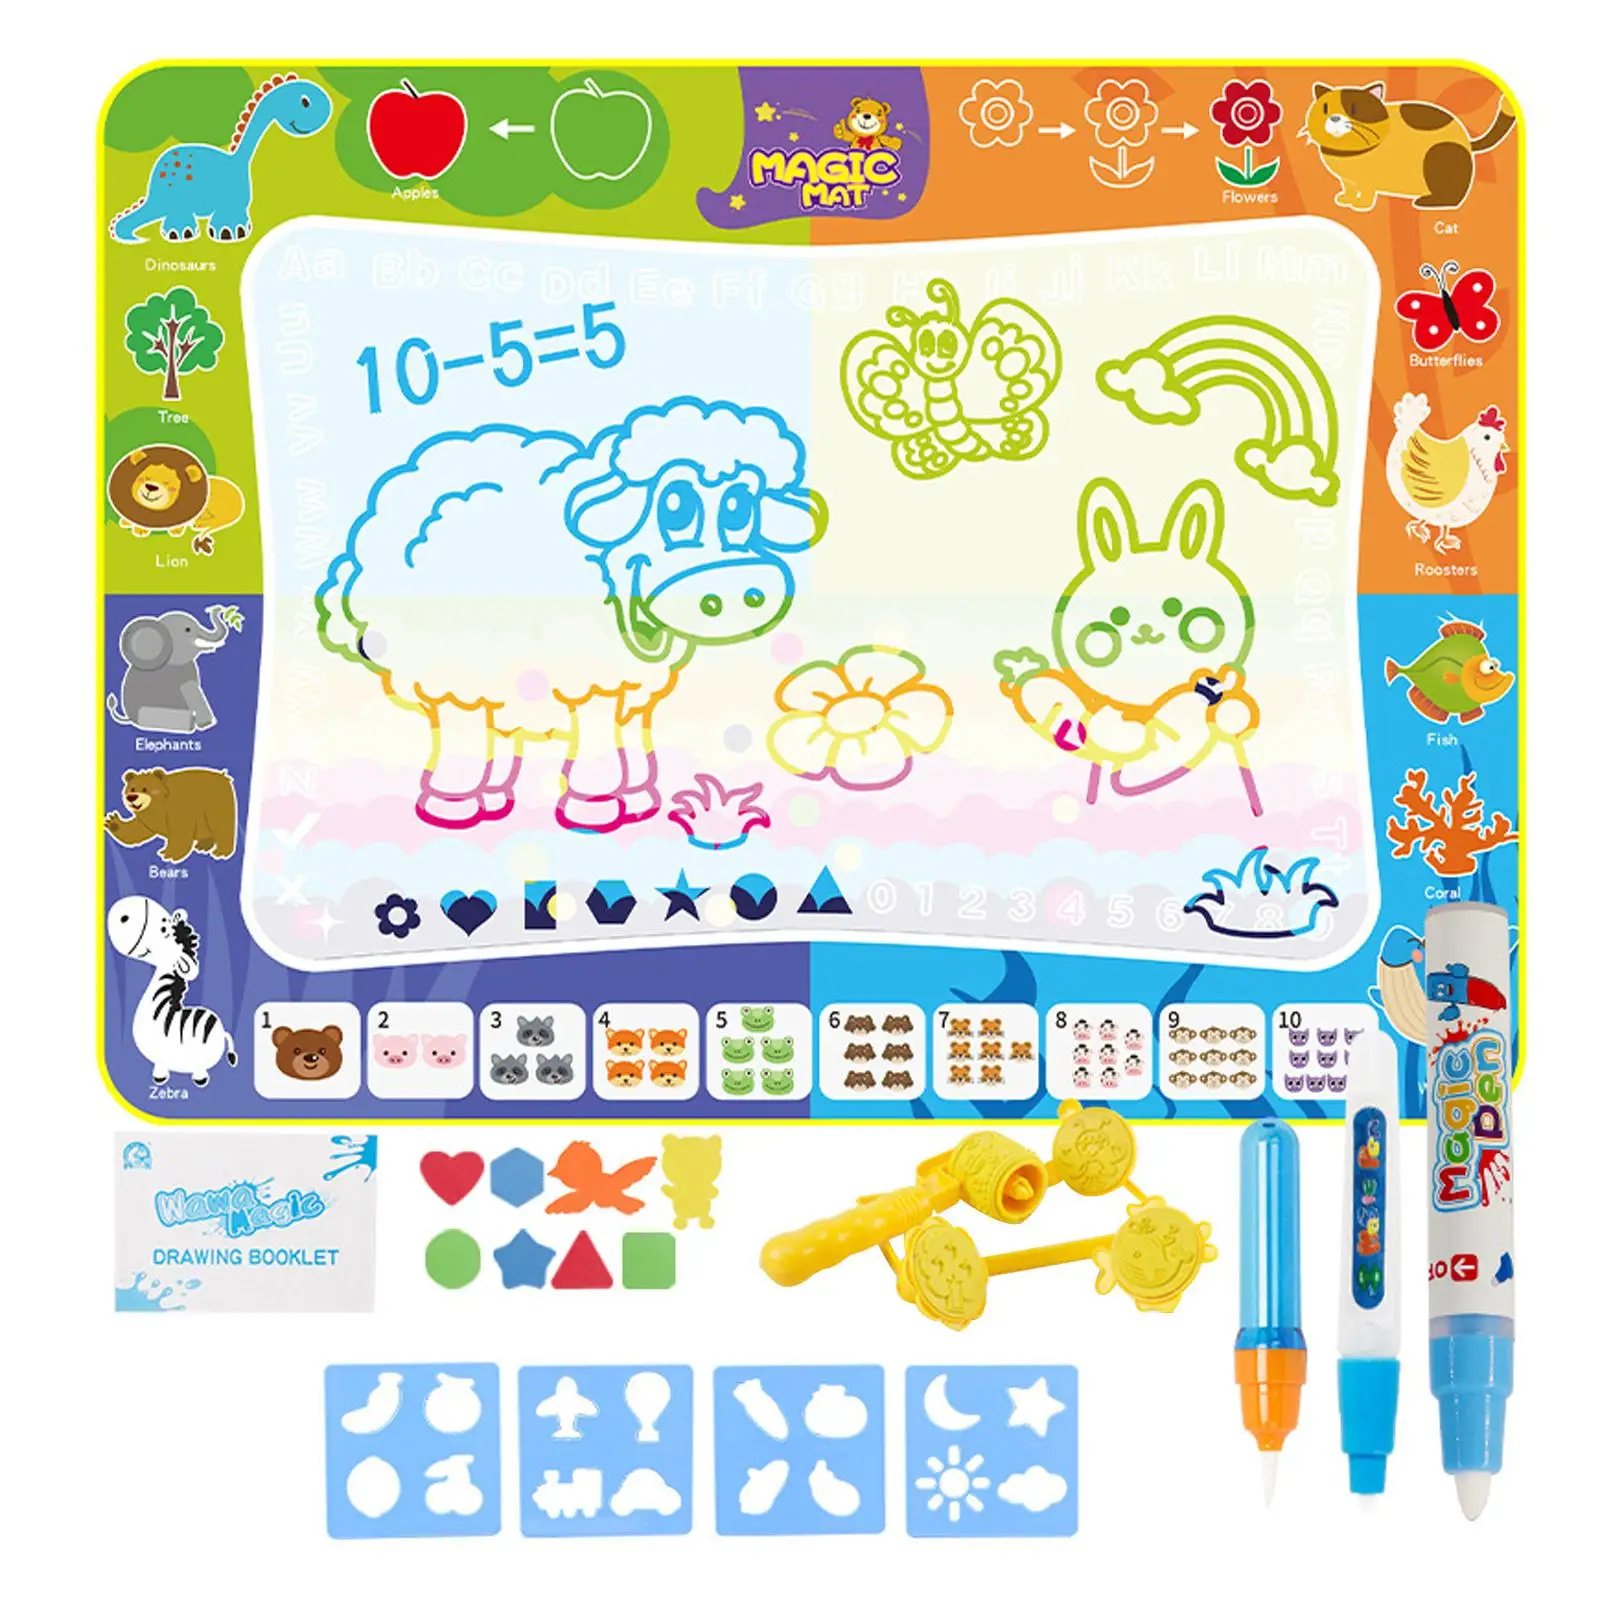 Water Doodle Mat Portable Painting Writing Doodle Board Water Drawing Mat for Kids